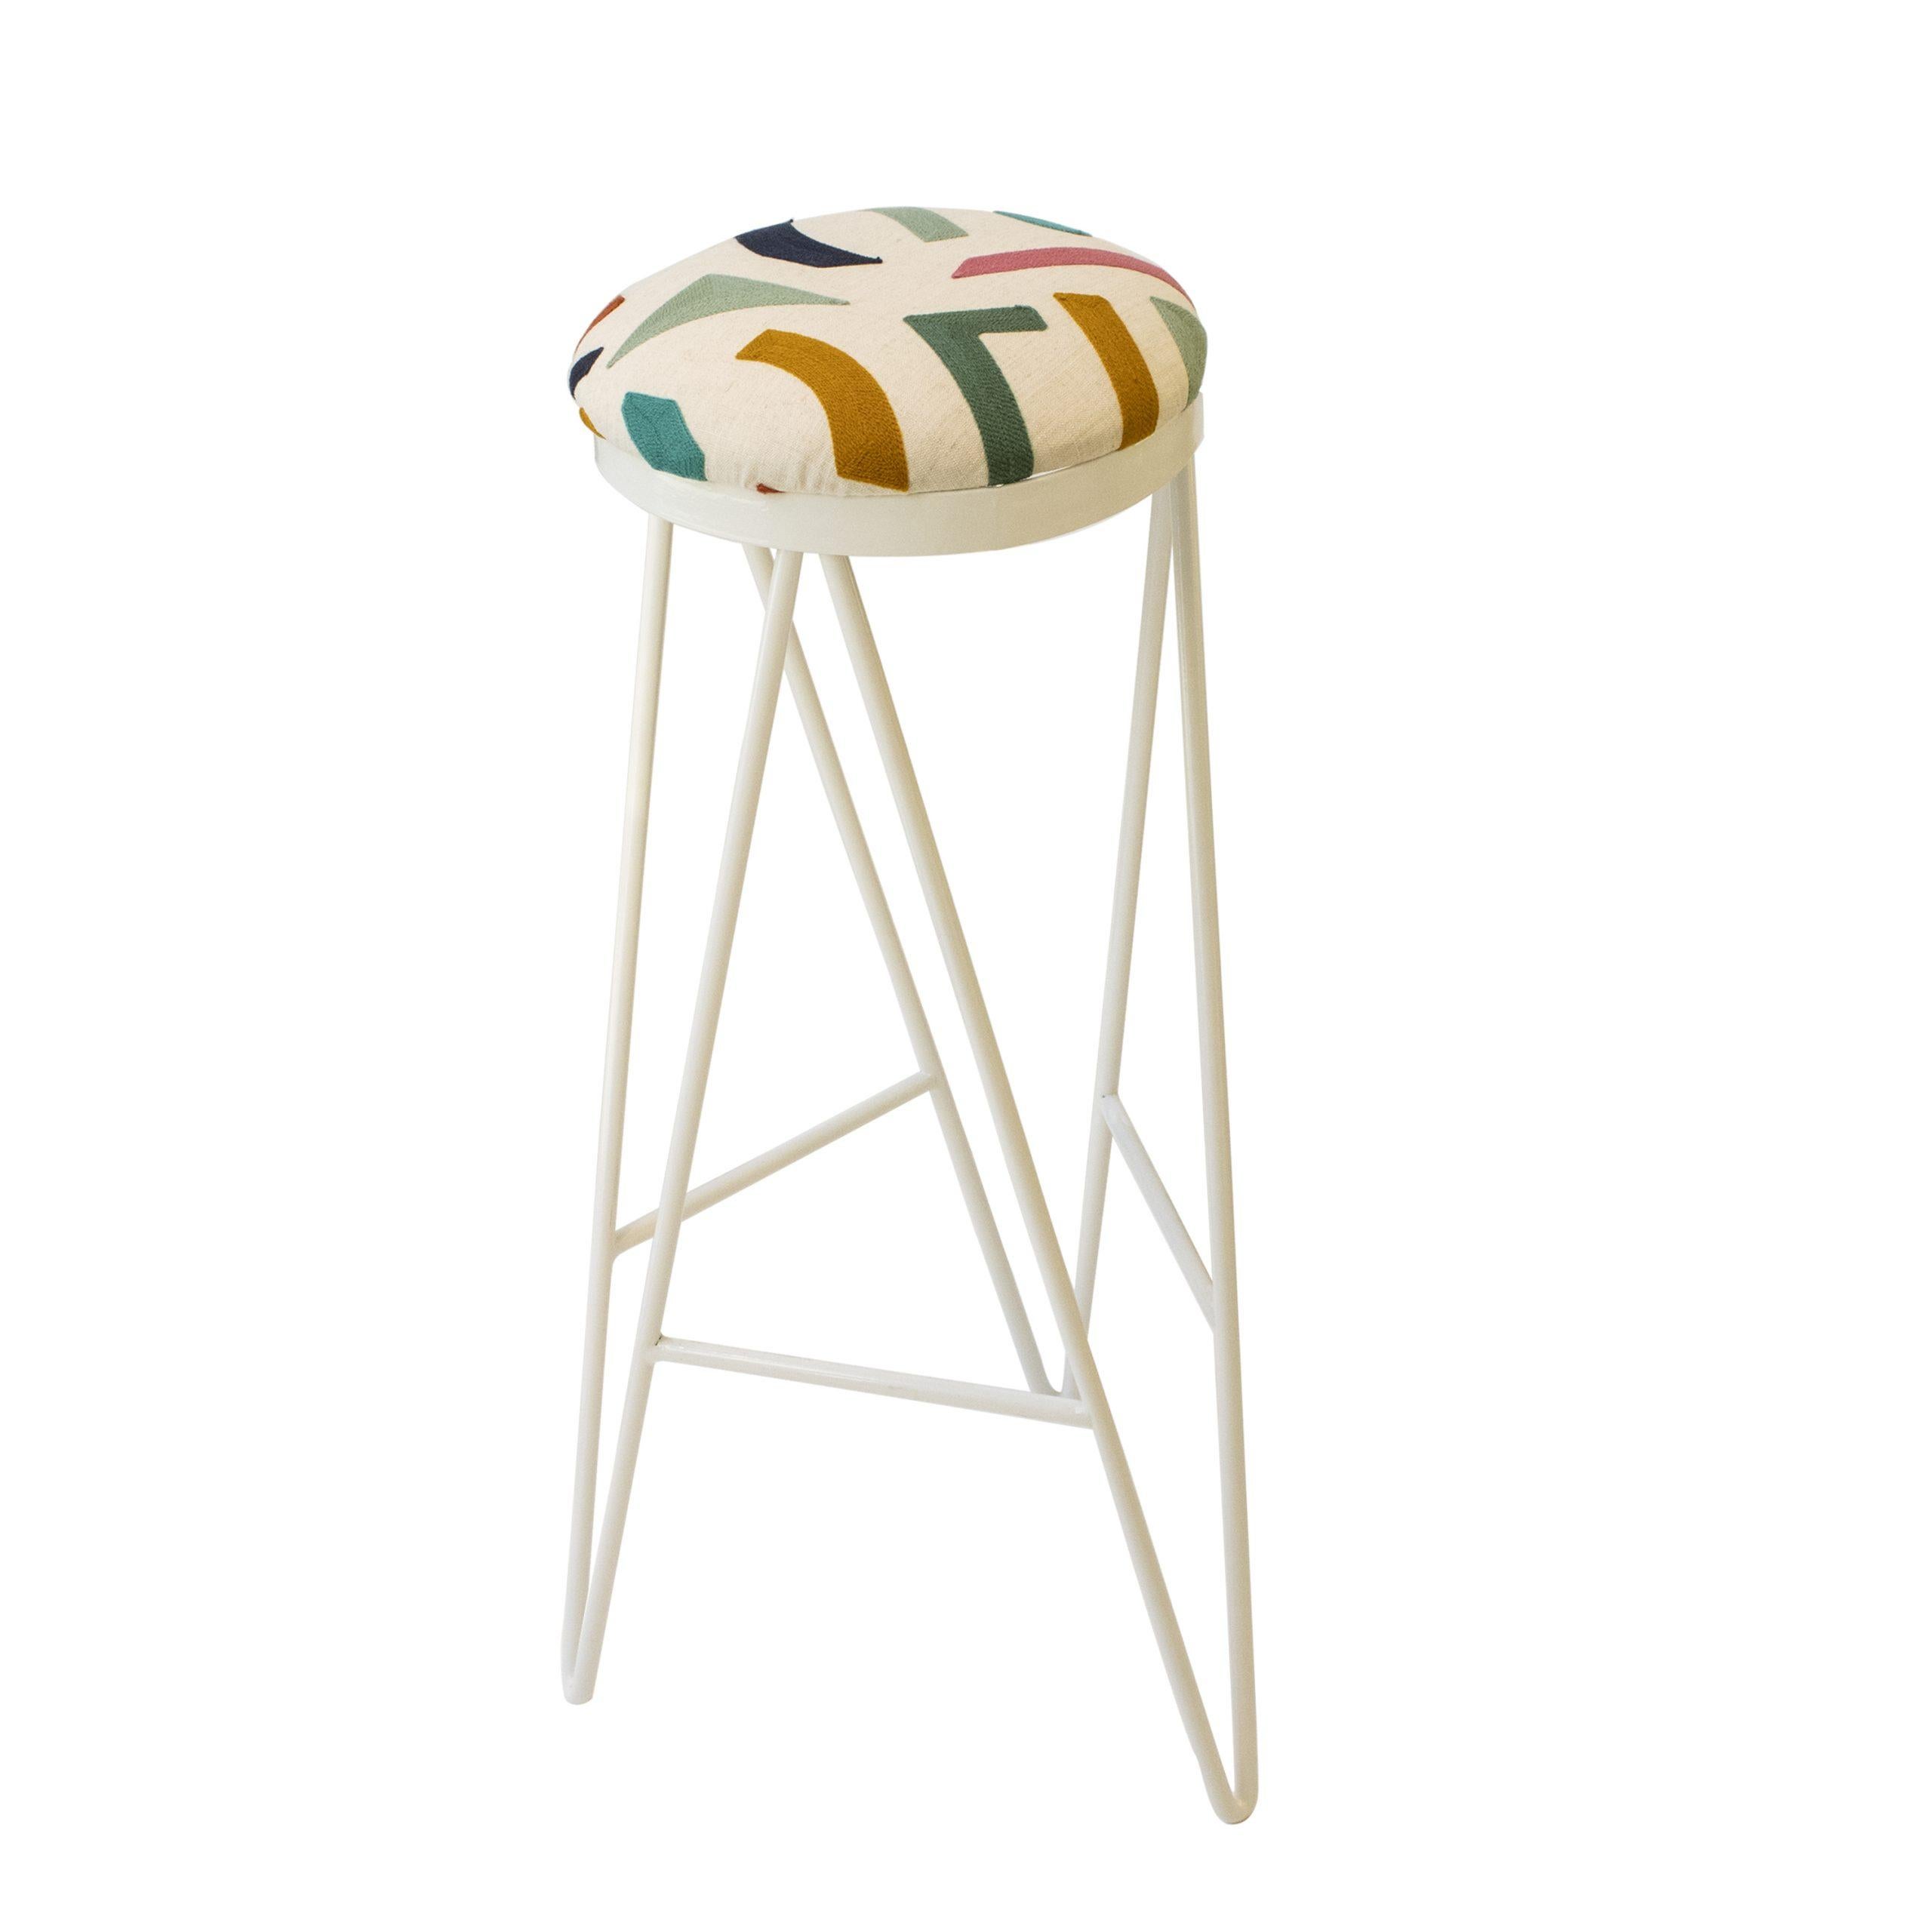 Contemporary Set of 8 Steel Stool Designed by IKB191 Studio , Spain, 2022 In New Condition For Sale In Madrid, ES